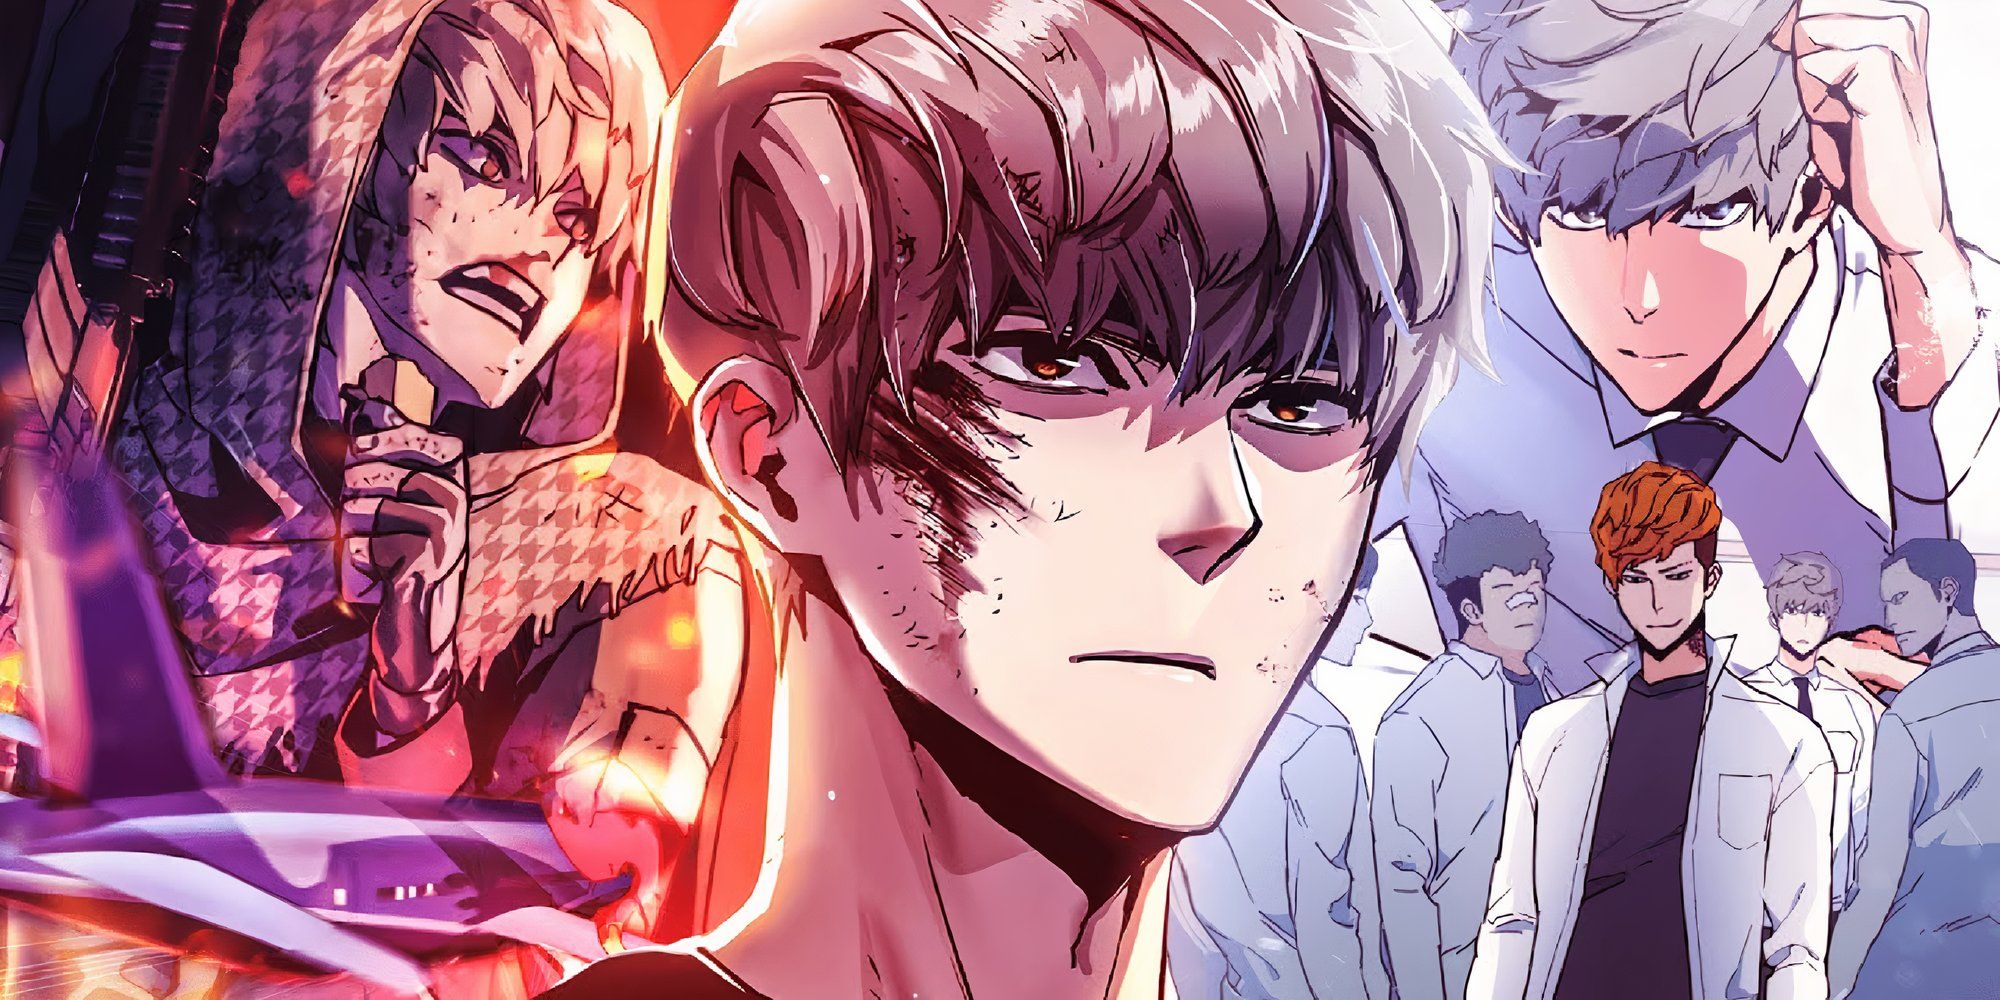 Ijin from teenage mercenary staring off into the distance with blood smeared on his cheek with stills from the manhwa on either side of him in the background